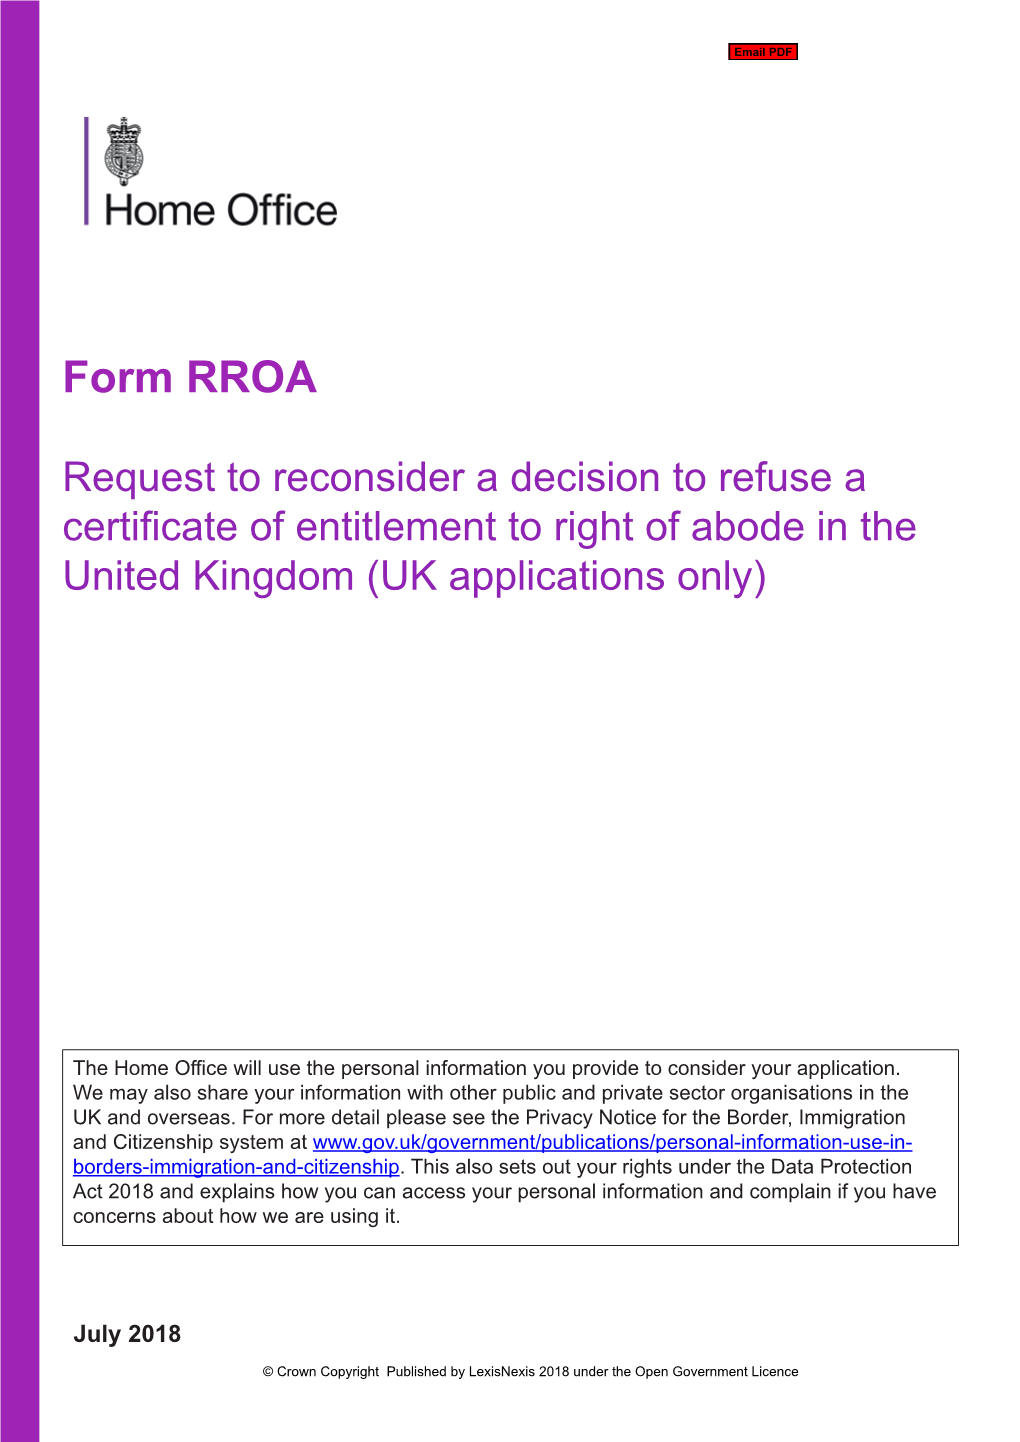 Request to Reconsider a Decision to Refuse a Certificate of Entitlement to Right of Abode in the United Kingdom (UK Applications Only)